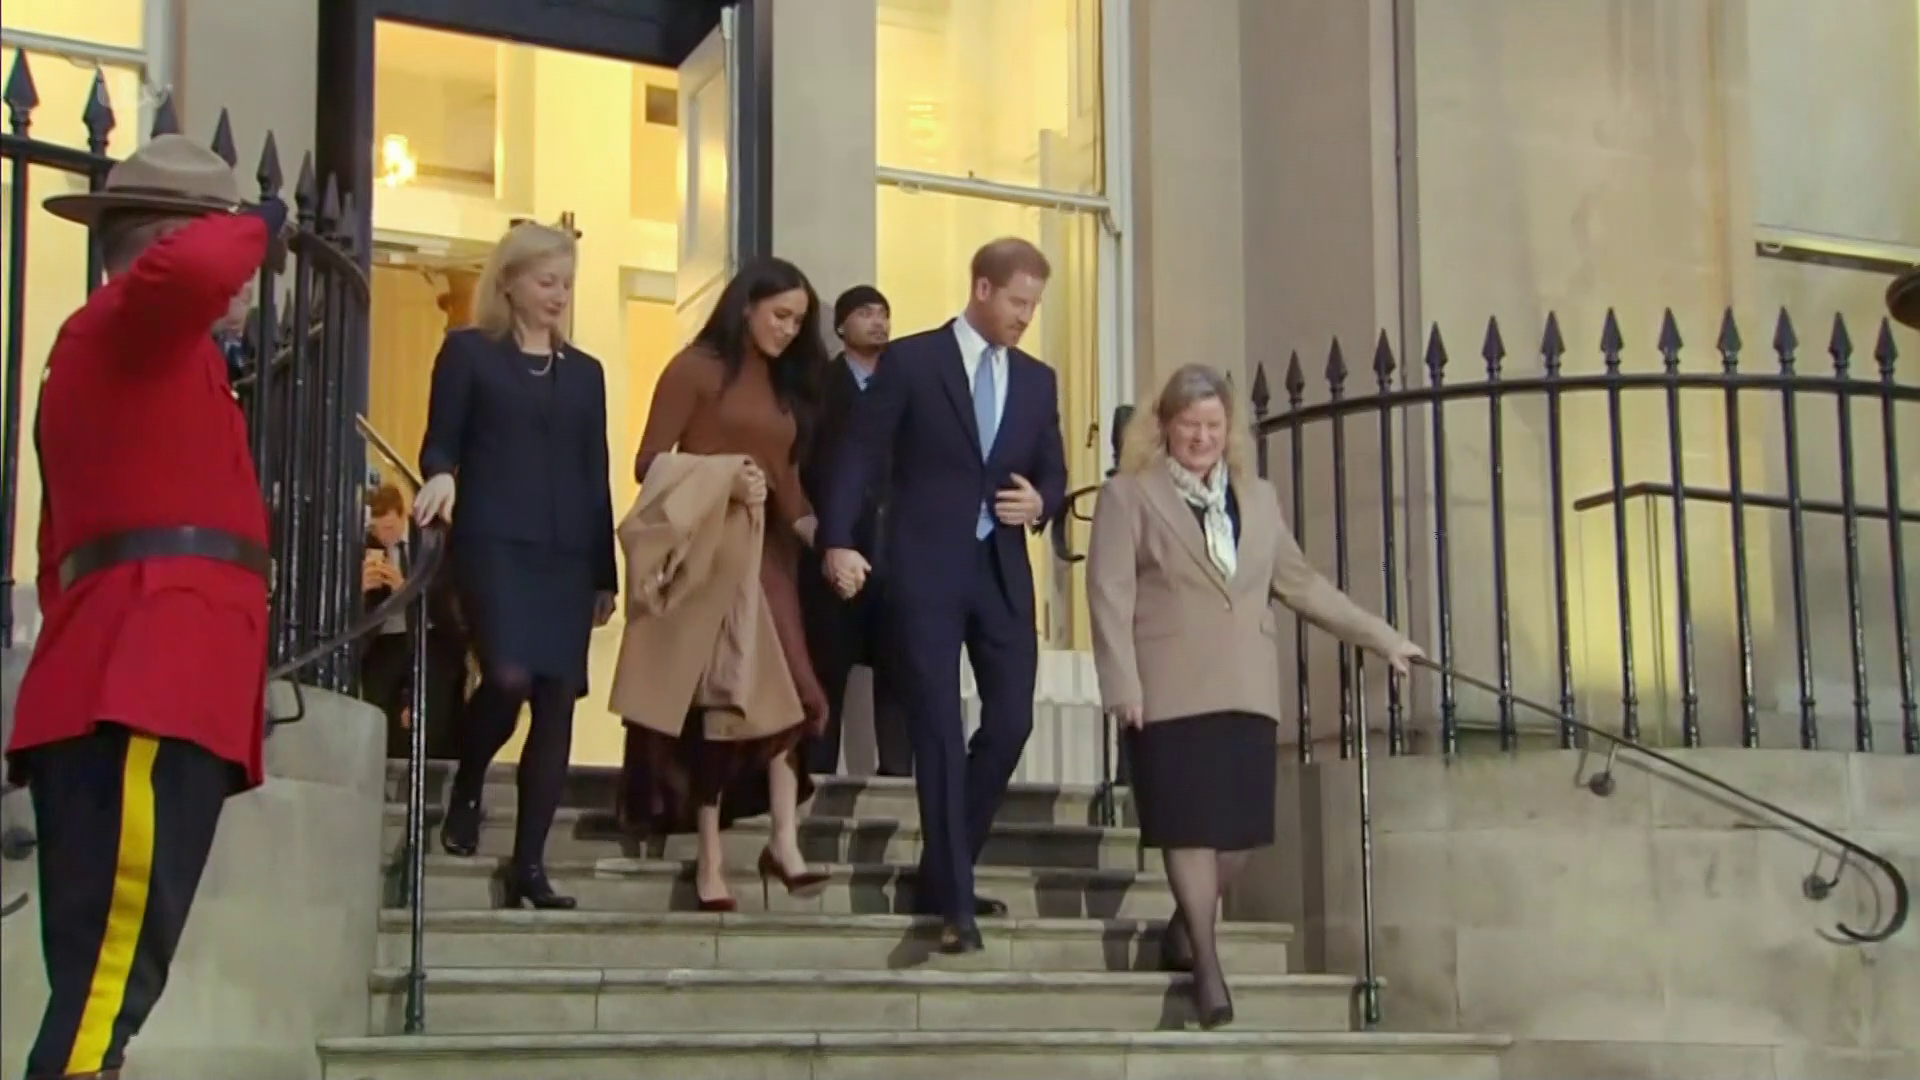 The documentary follows the news that the Duke and Duchess of Sussex are stepping down as royals